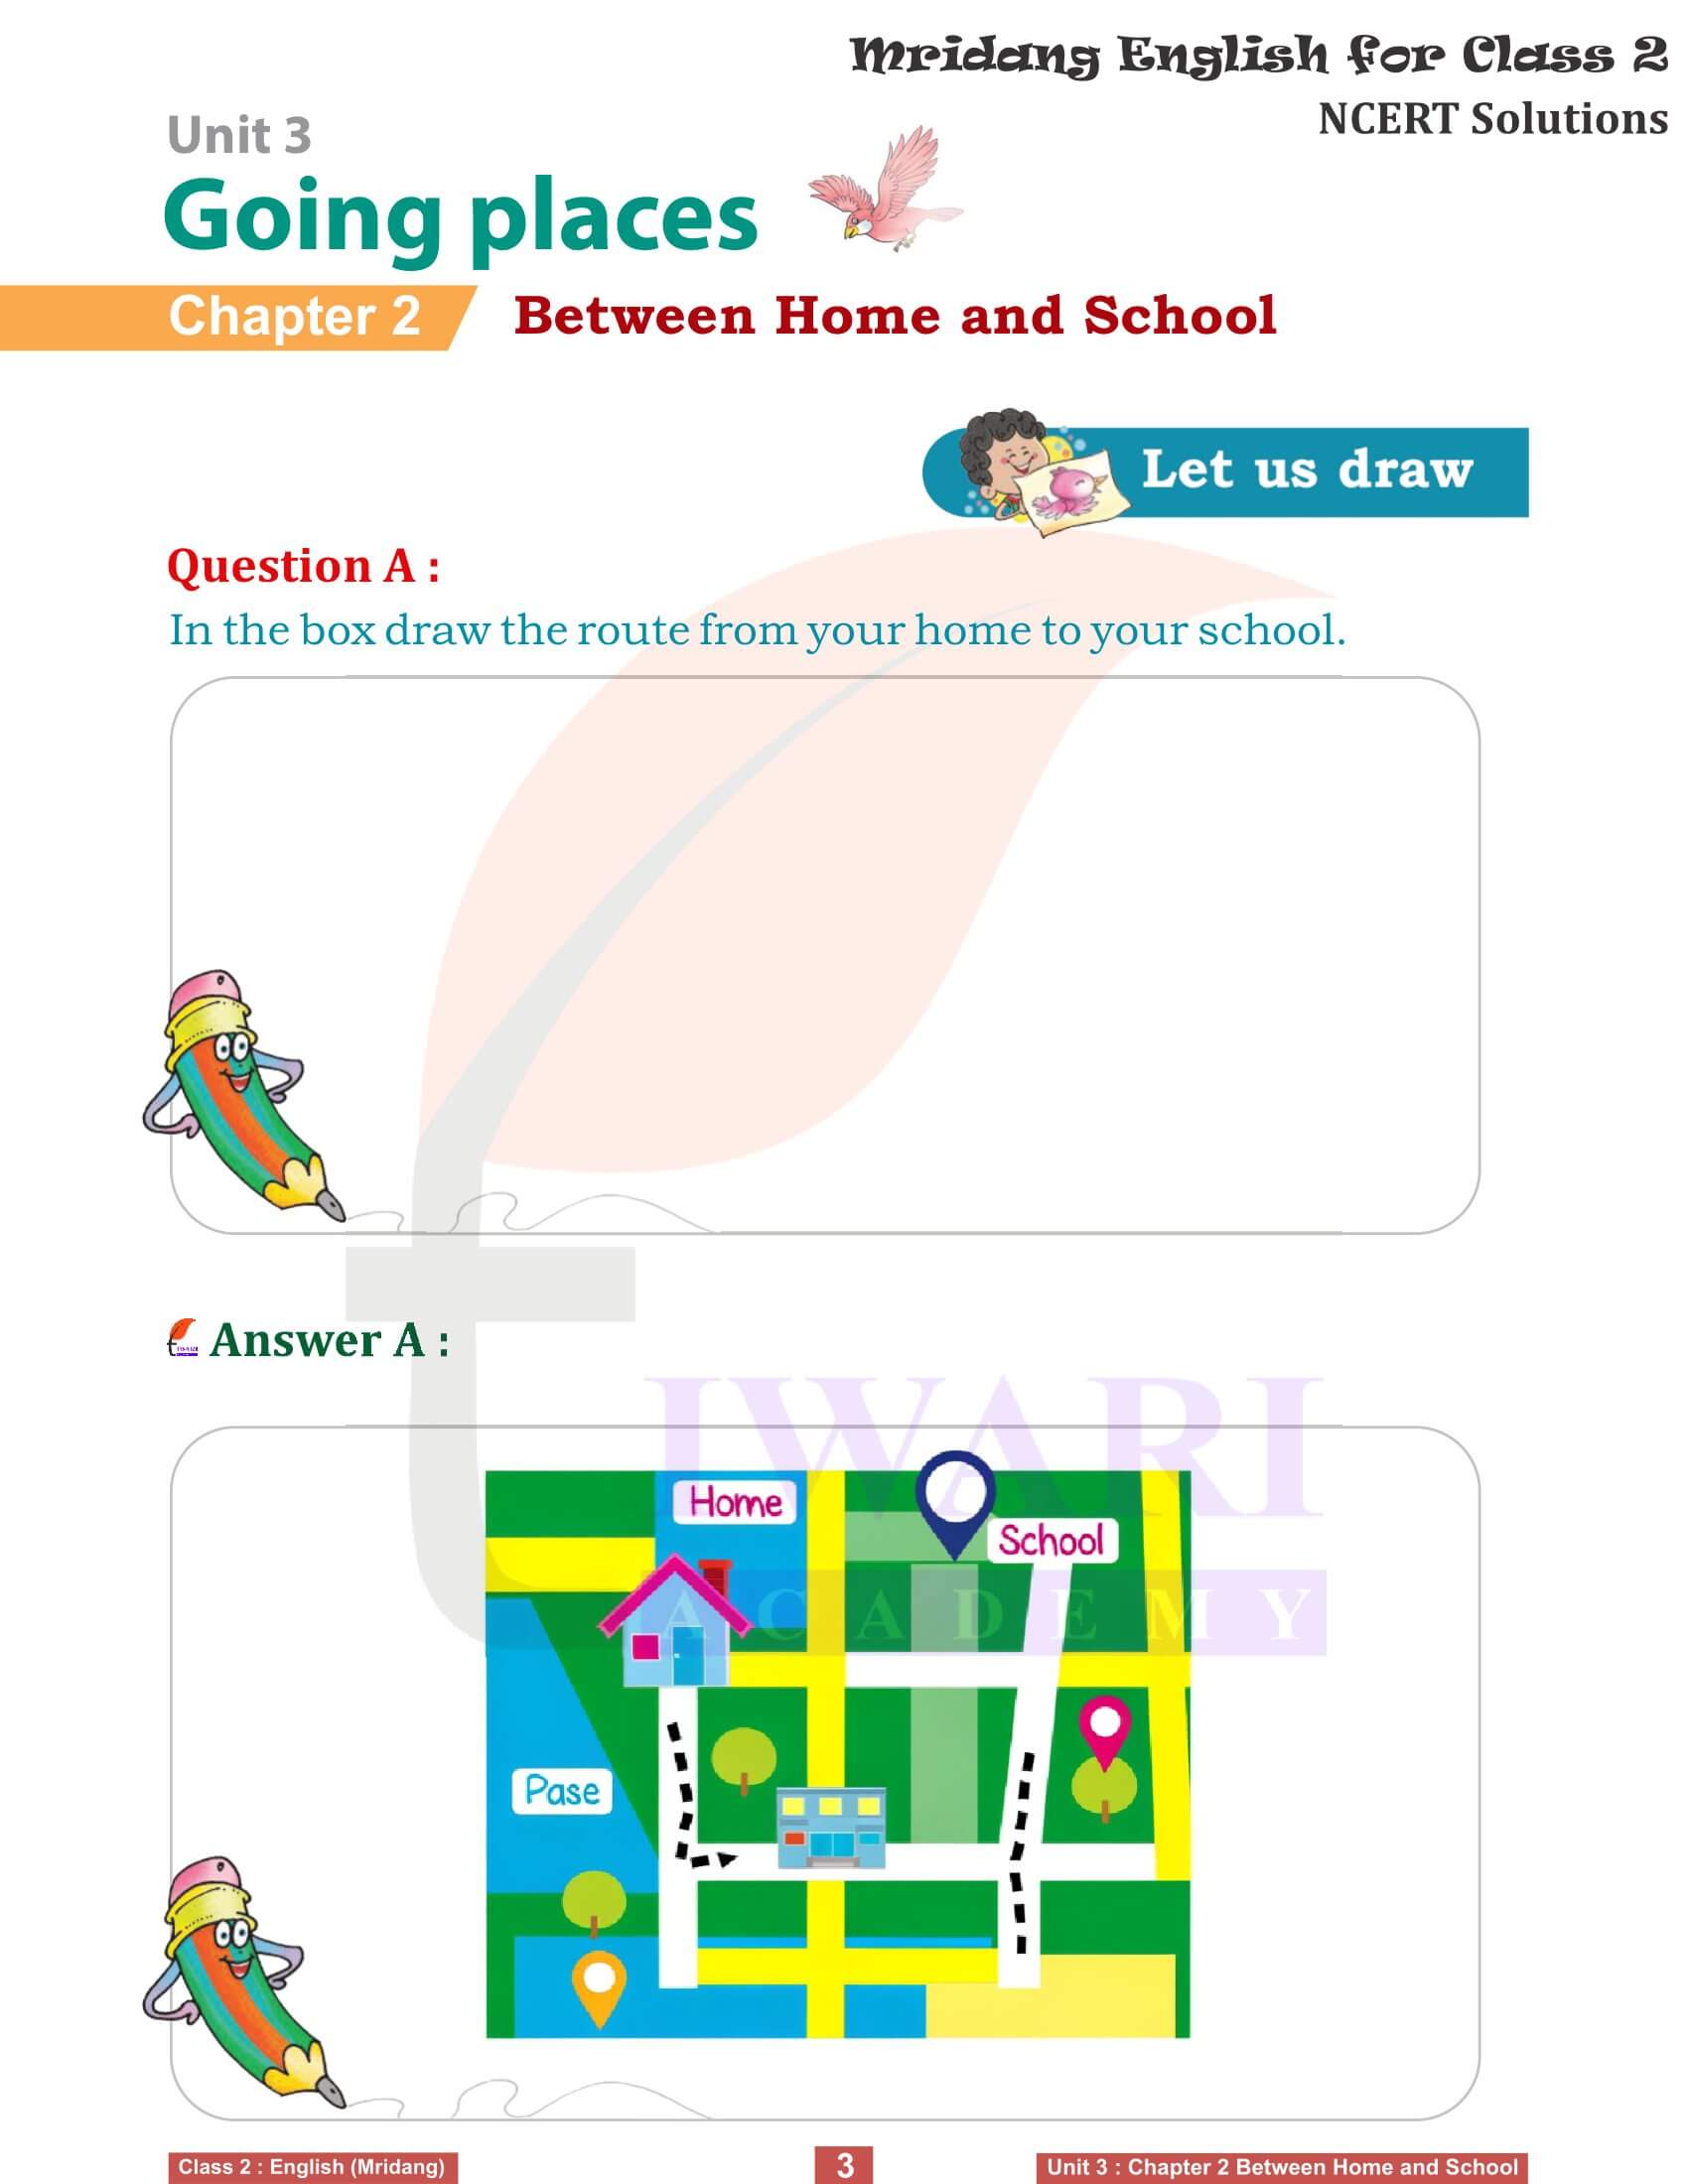 NCERT Solutions for Class 2 English Mridang Unit 3 Going Places Come Back Chapter 2 Question answers